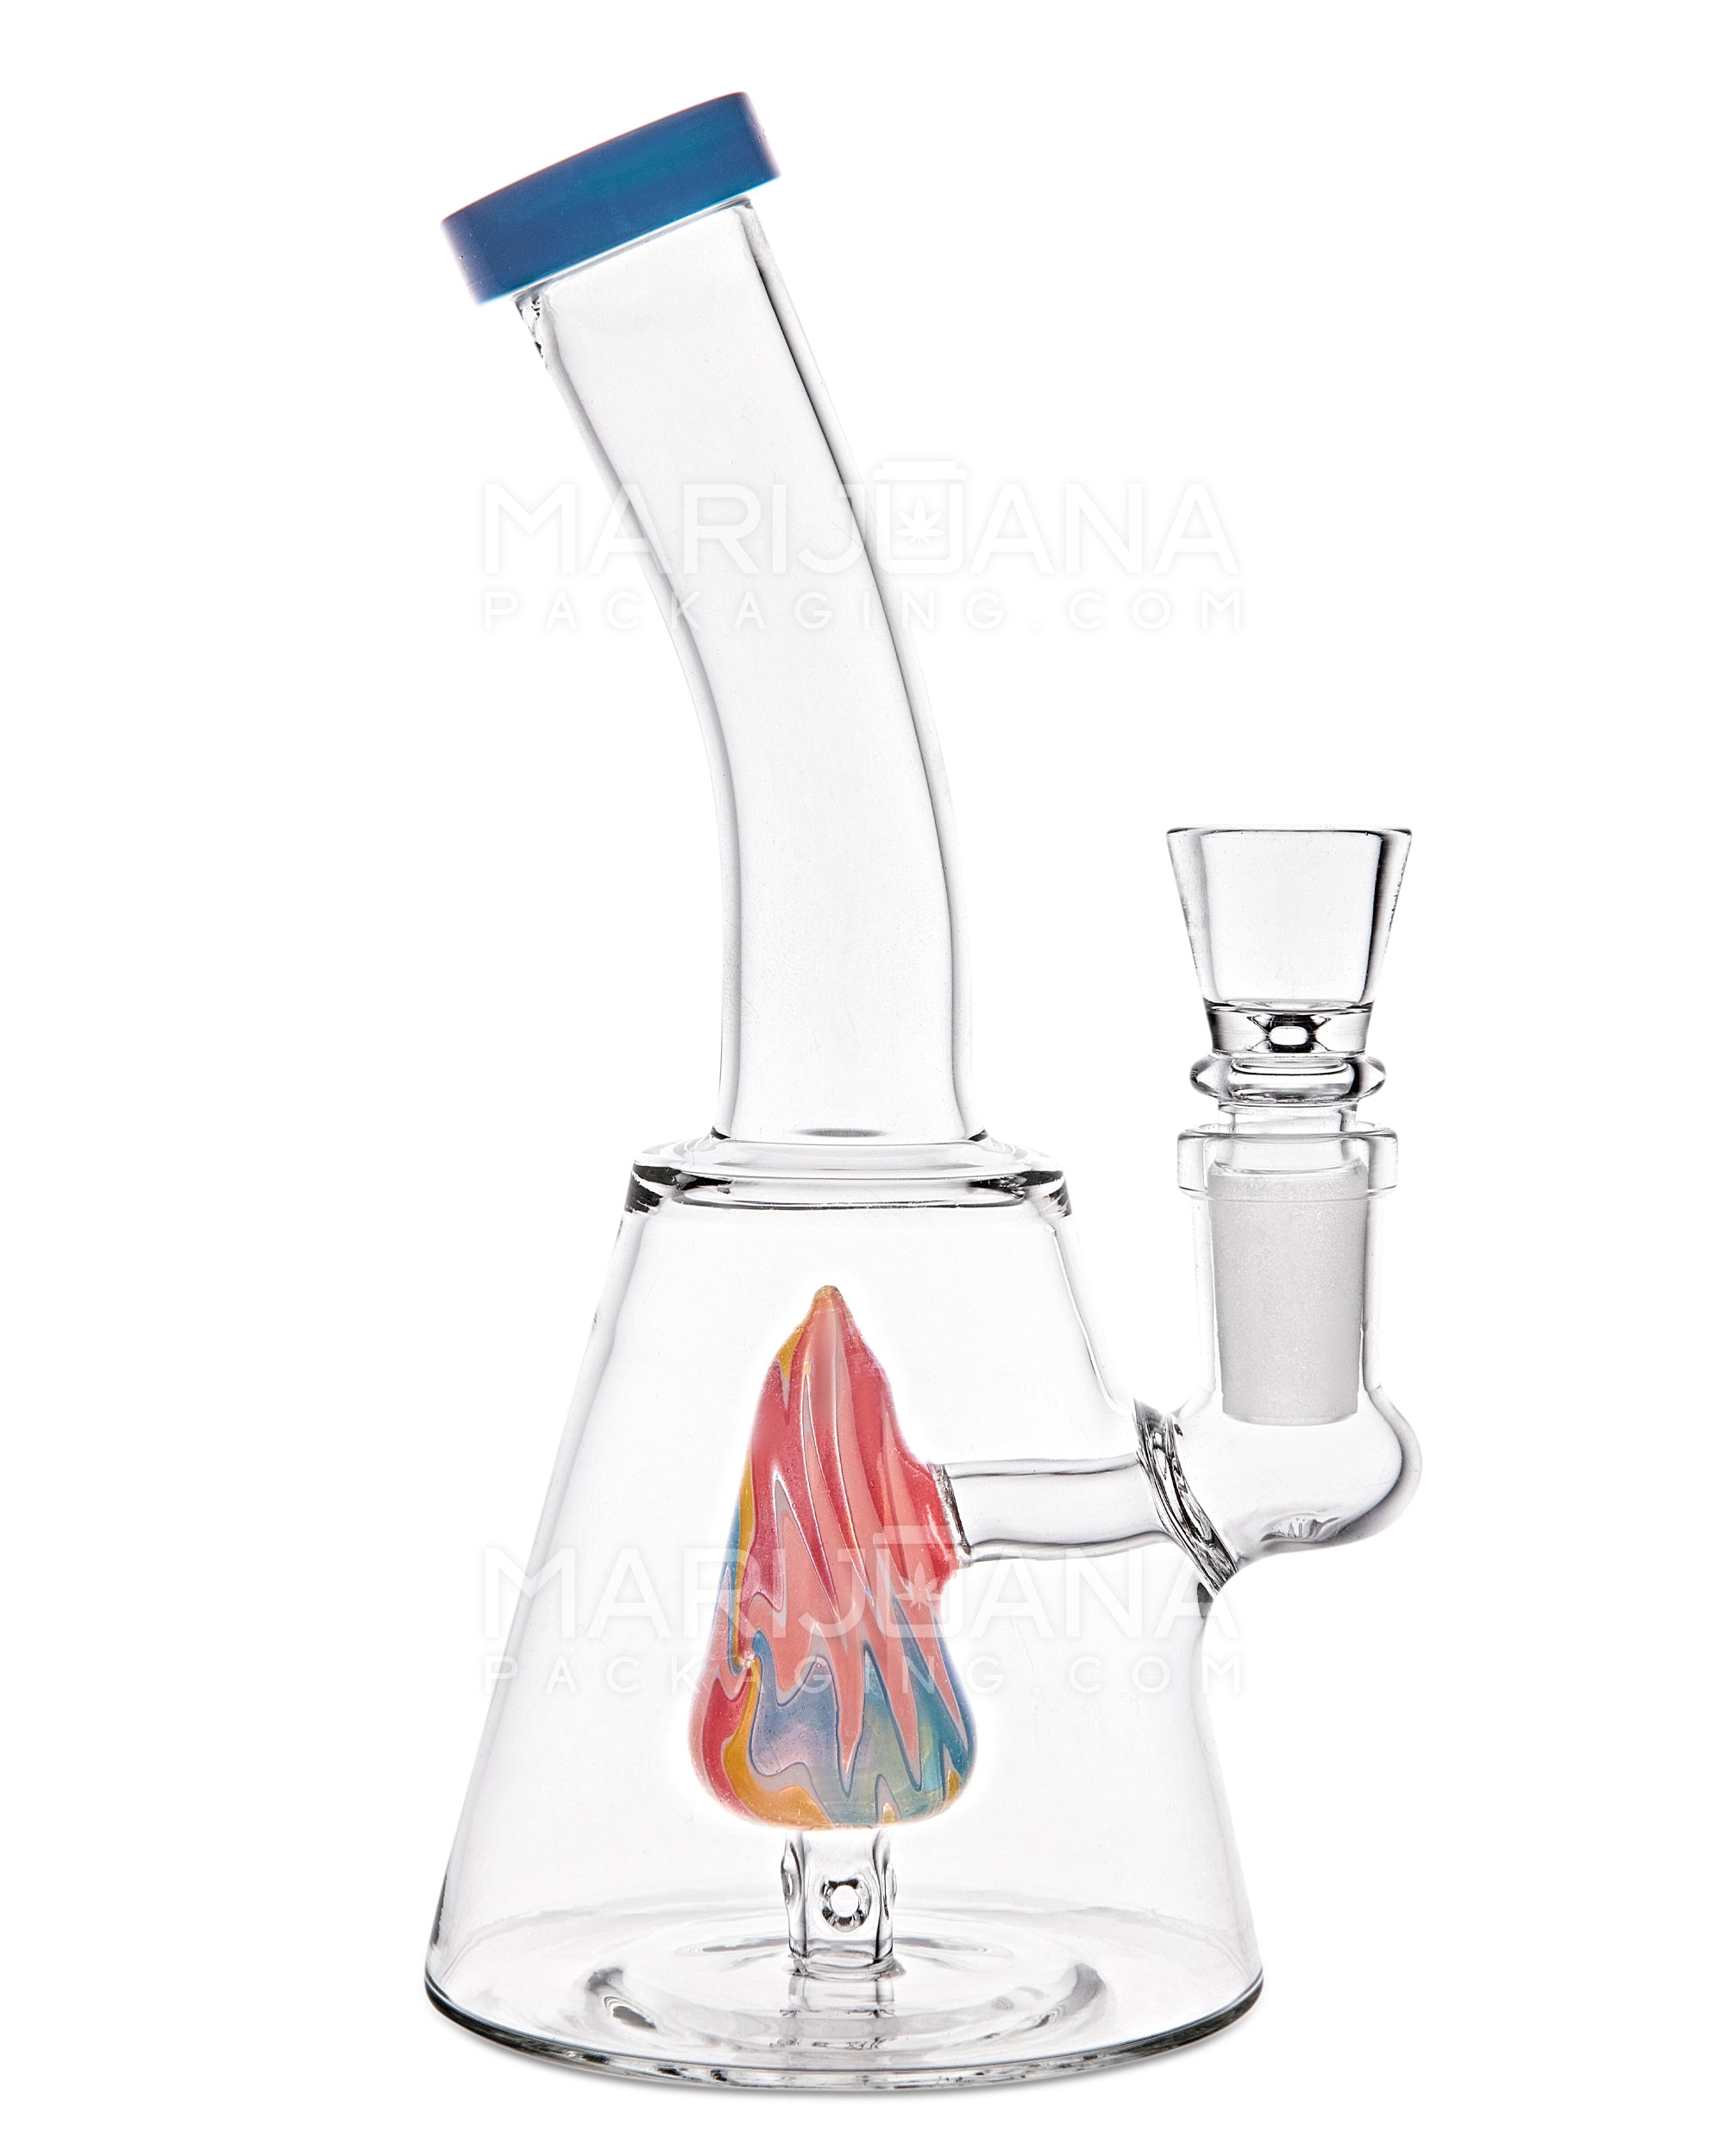 Bent Neck Painted Barrel Perc Glass Beaker Water Pipe | 5in Tall - 14mm Bowl - Mixed - 1